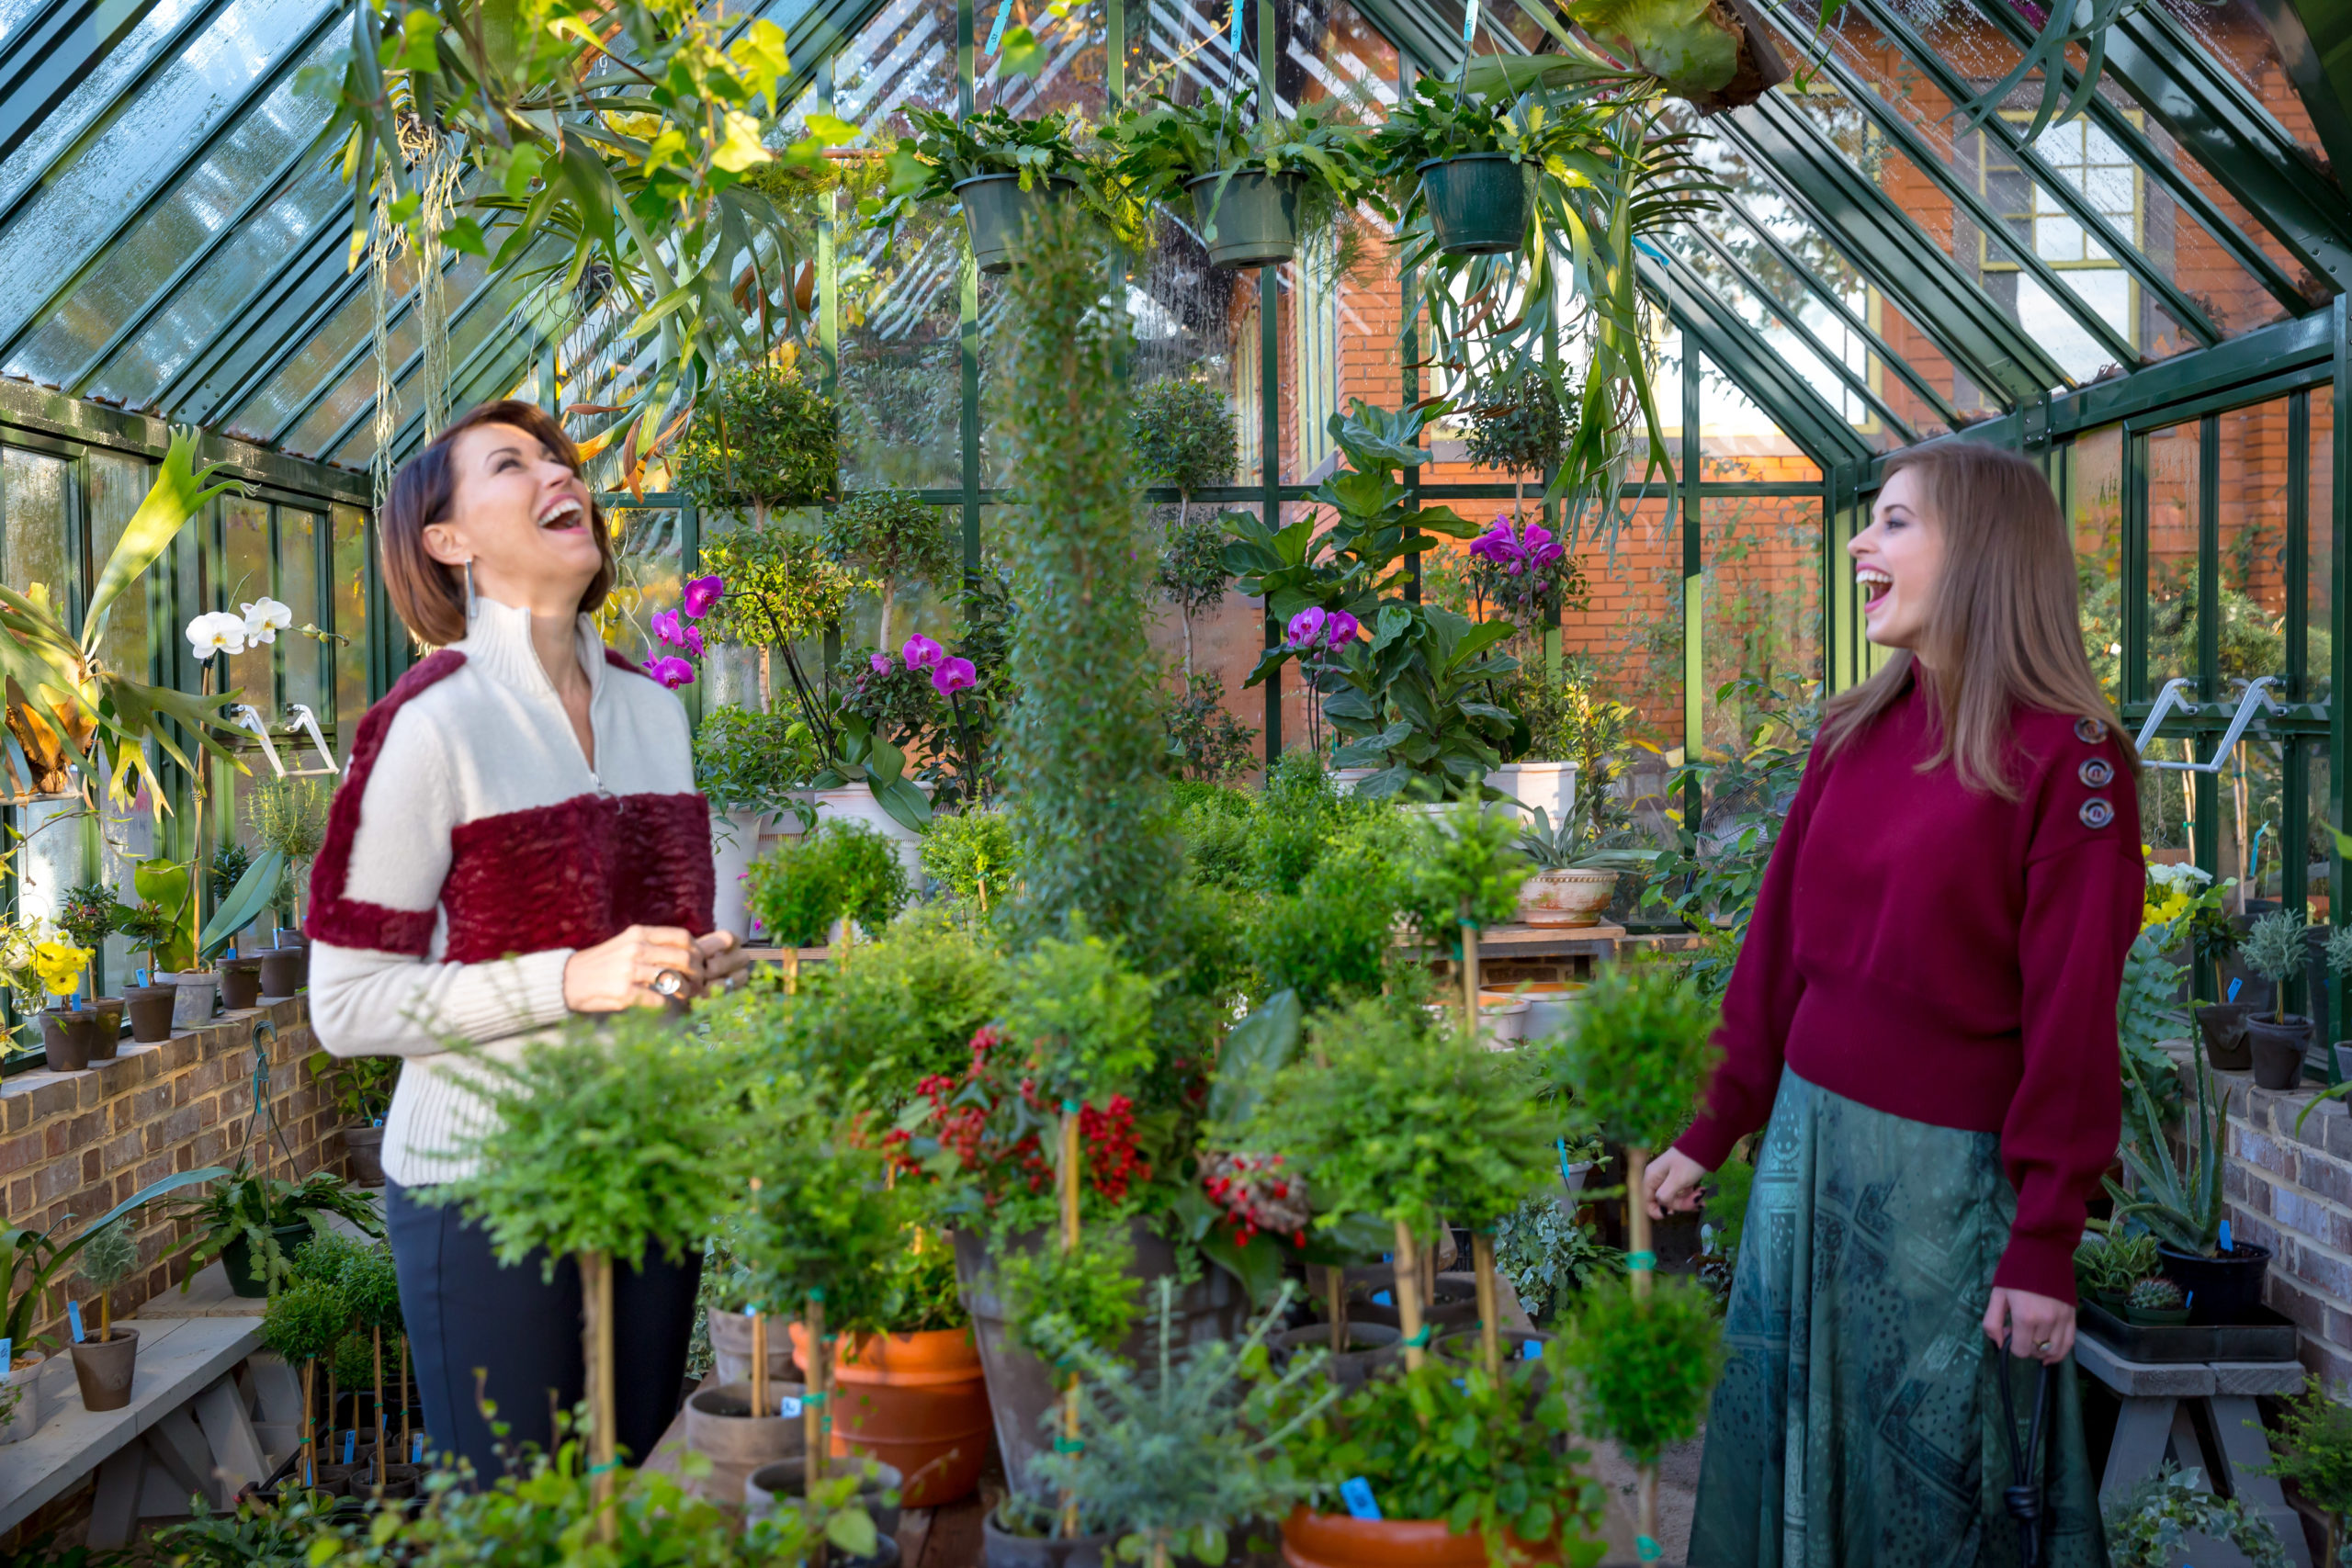 Two women in a greenhouse both with brown hair laughing. One wears a wine & grey sweater and the other wears a wine sweater and a green skirt